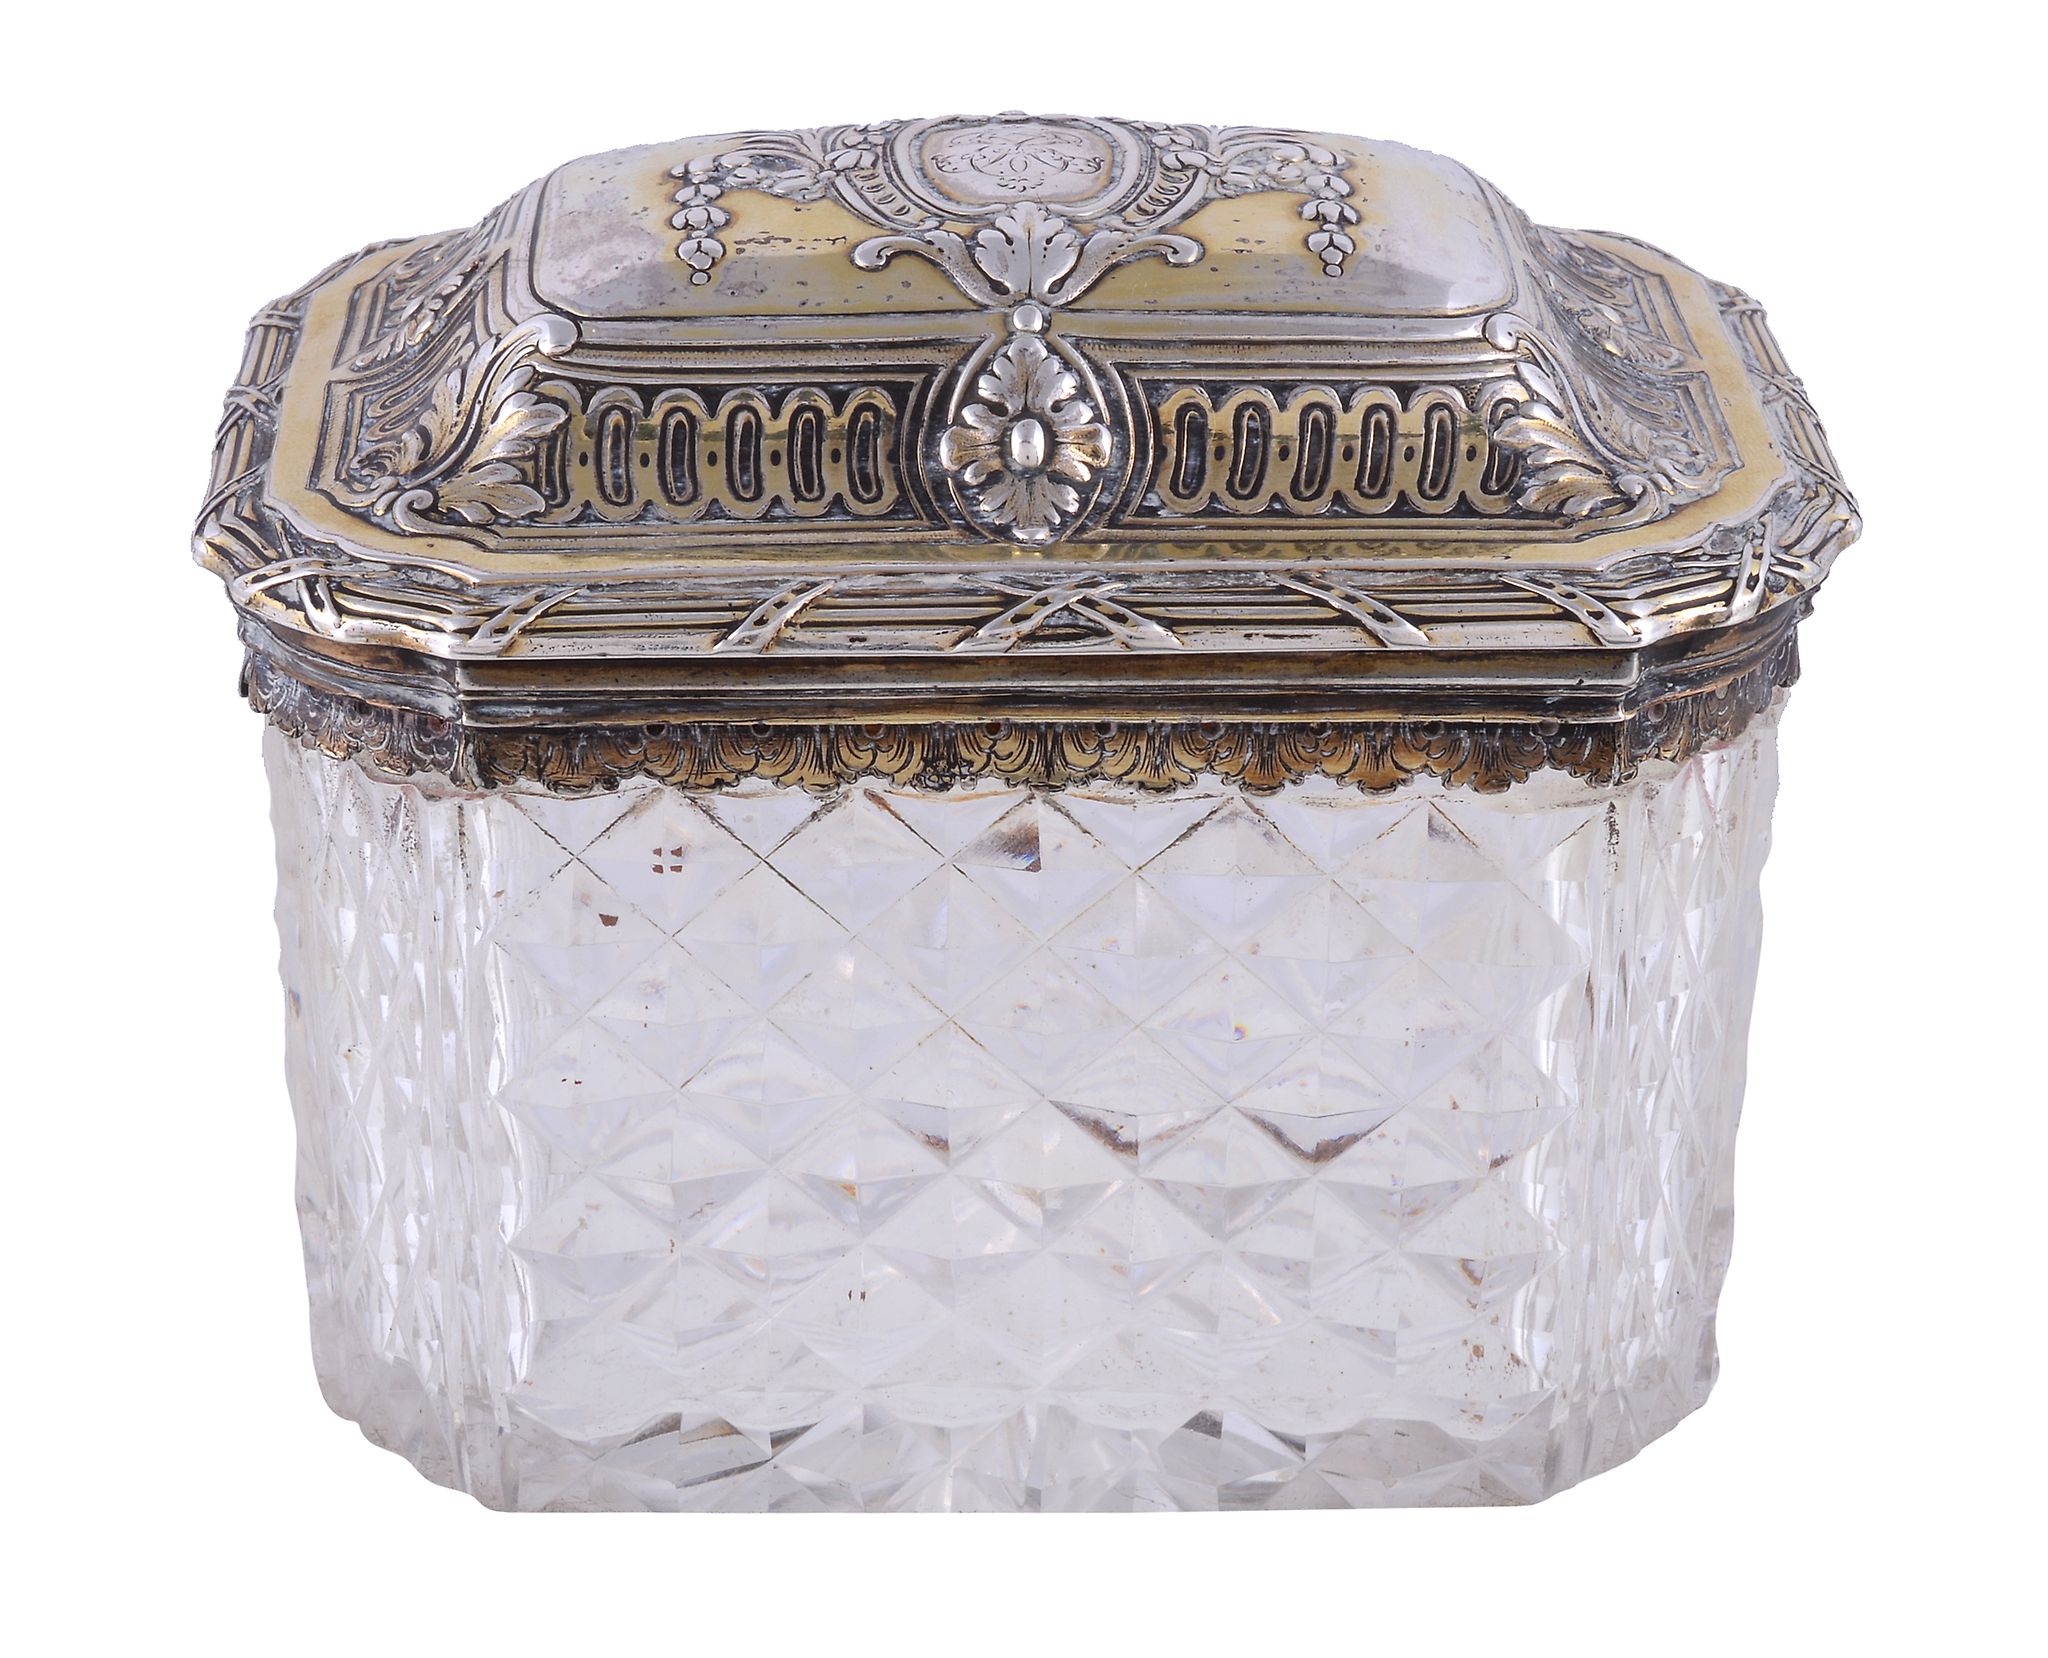 A silver gilt mounted cut glass canted-rectangular tea caddy in French taste, no maker's mark, two